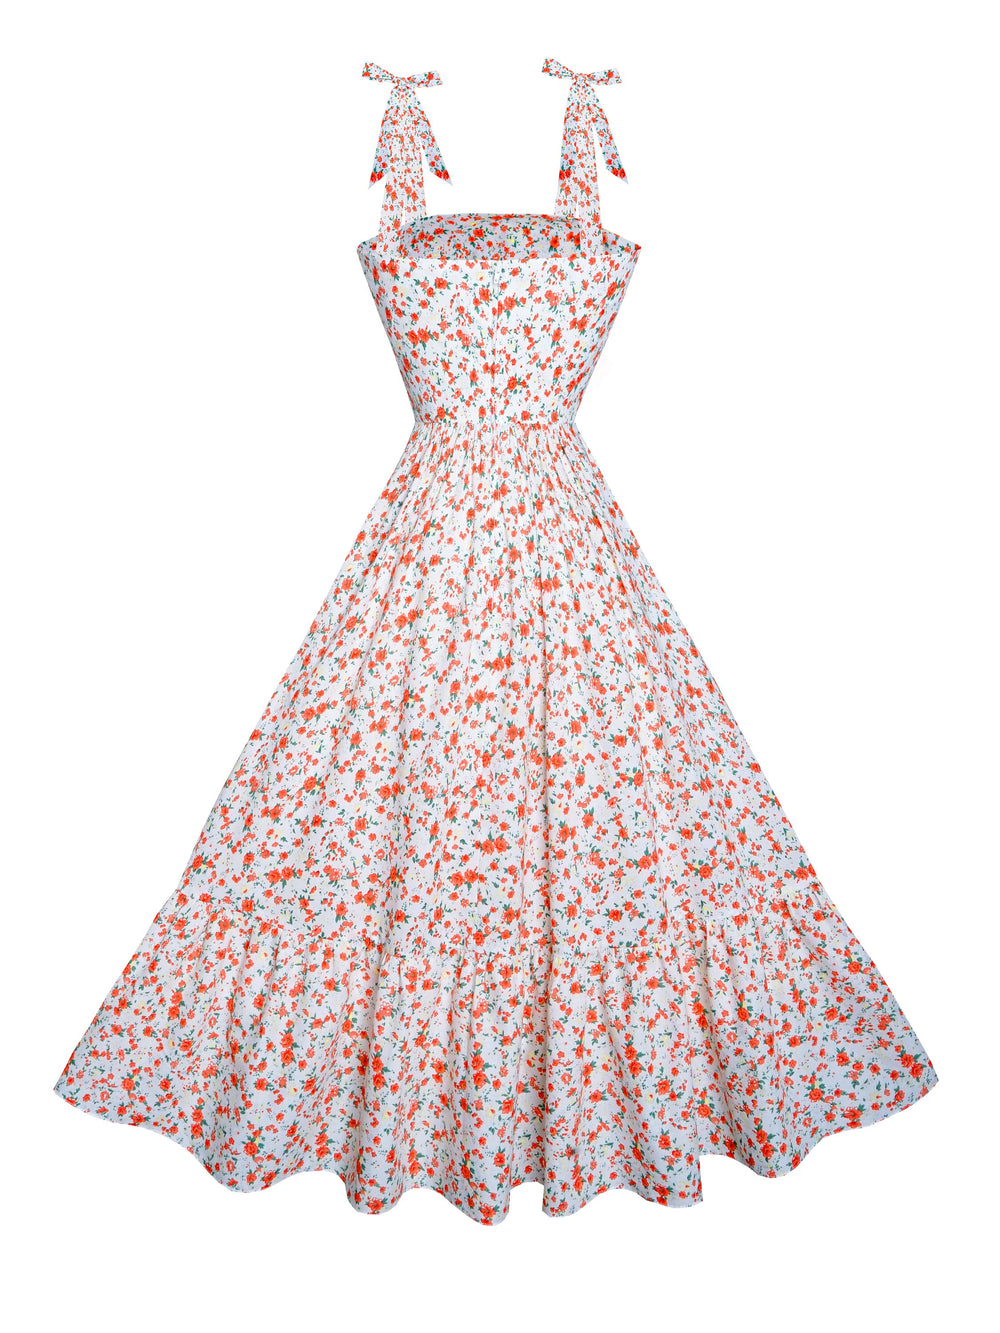 RTS - Size S - Chelsea Dress "Orange Blossom Special"